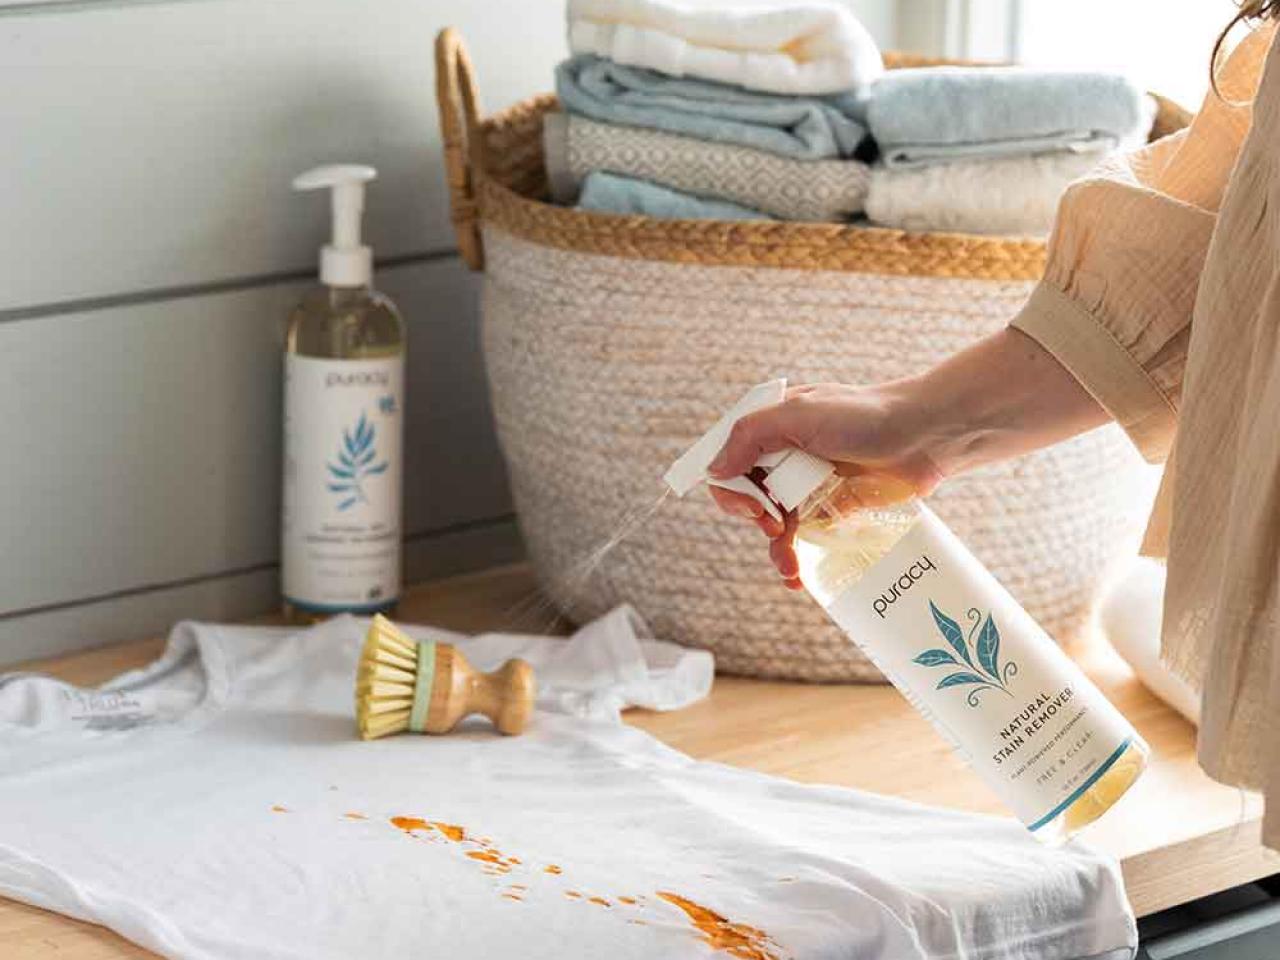 20 Best Cleaning Products, According to Professional Cleaners